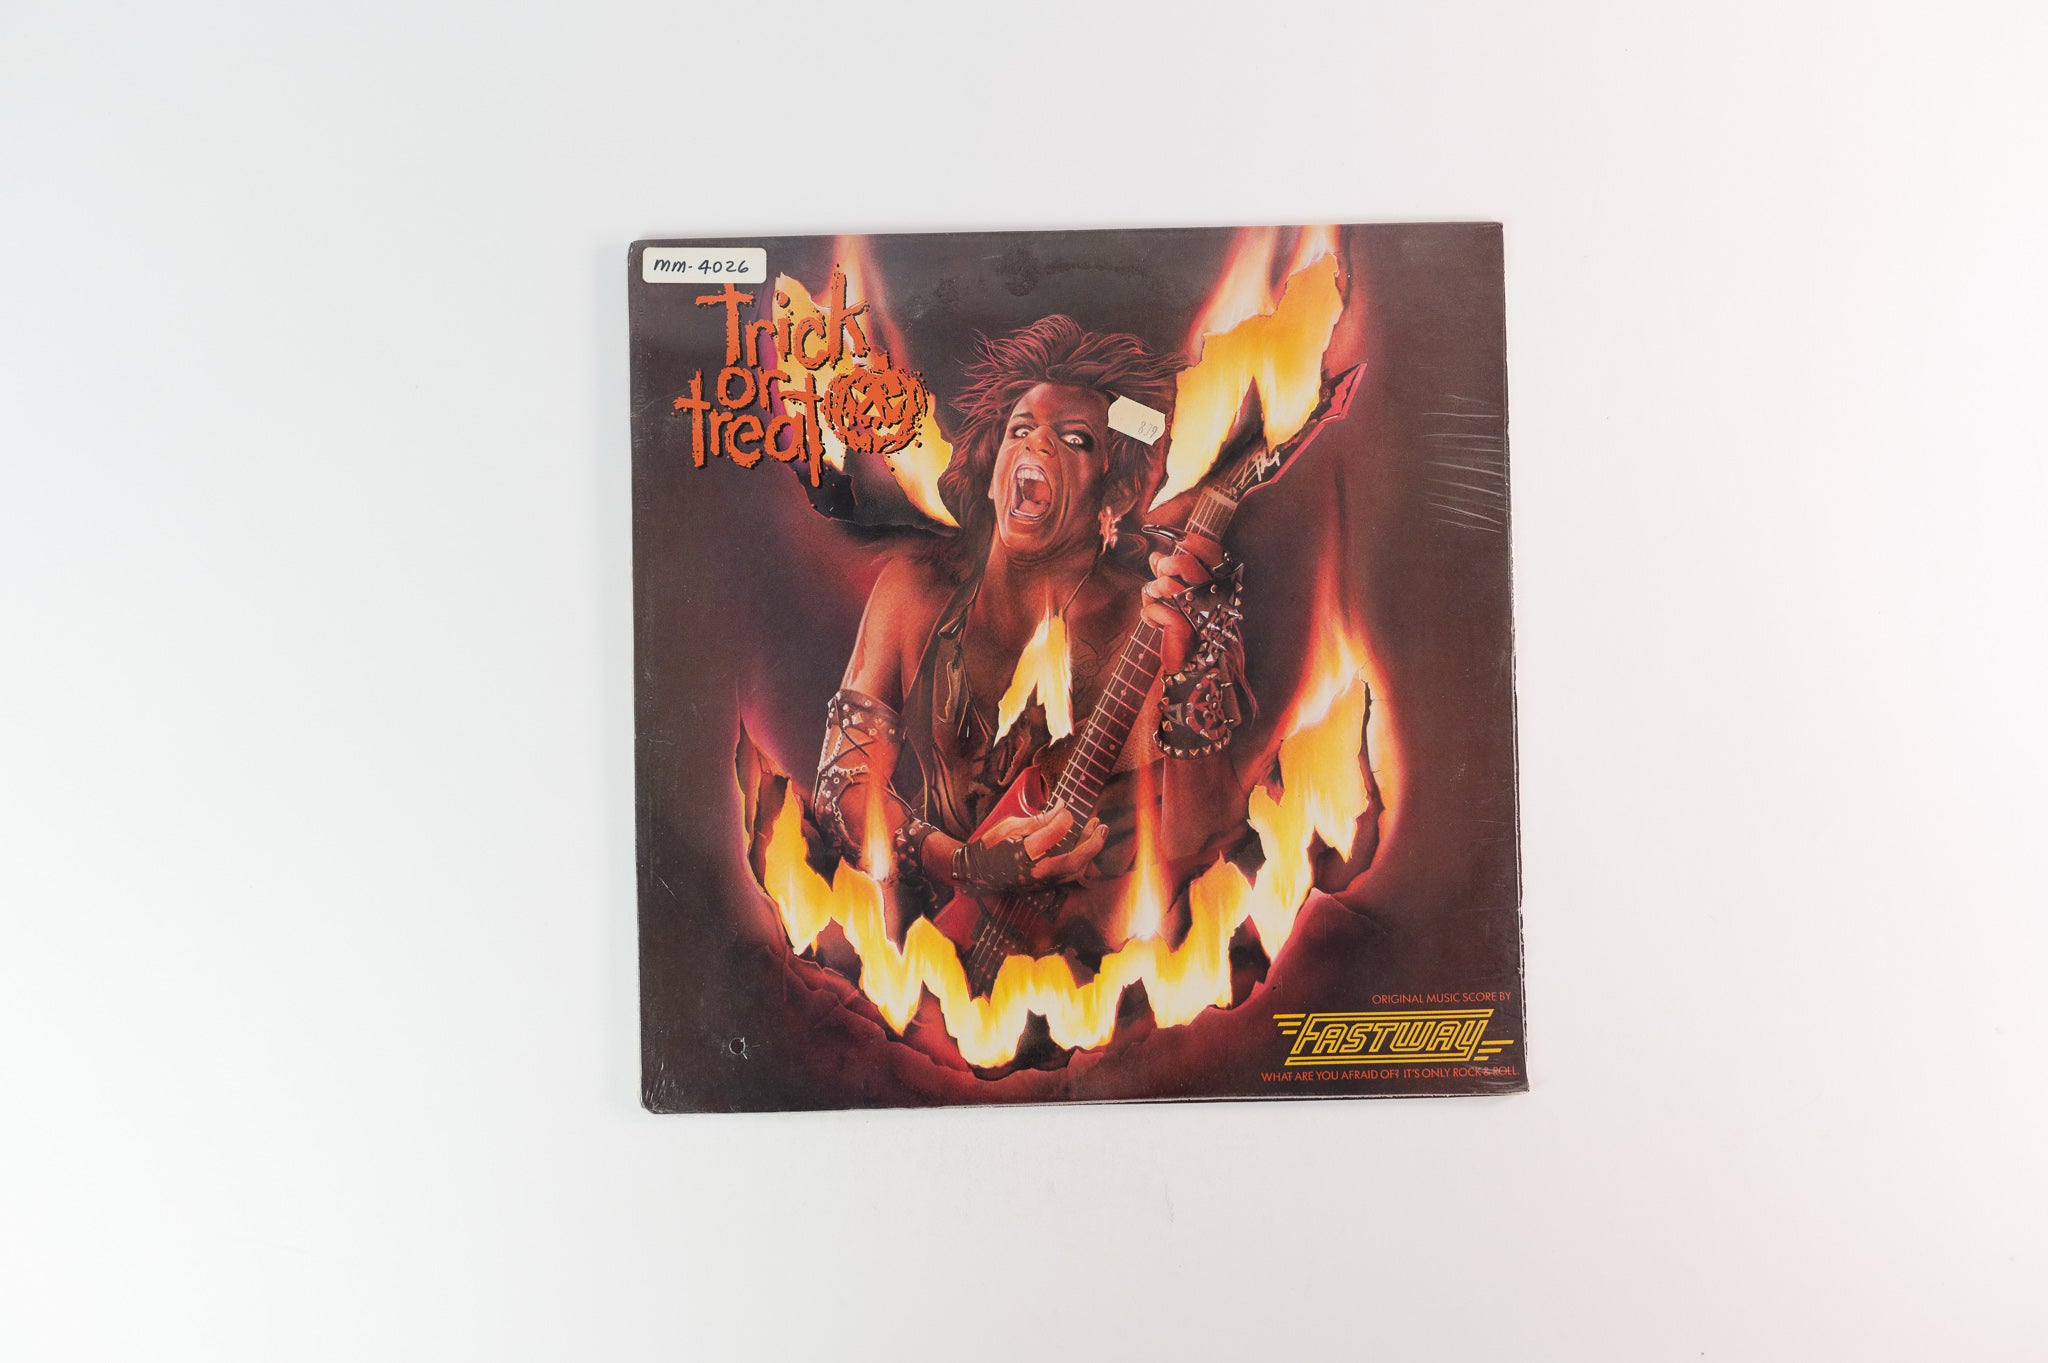 Fastway - Trick Or Treat - Original Motion Picture Soundtrack on Columbia Sealed